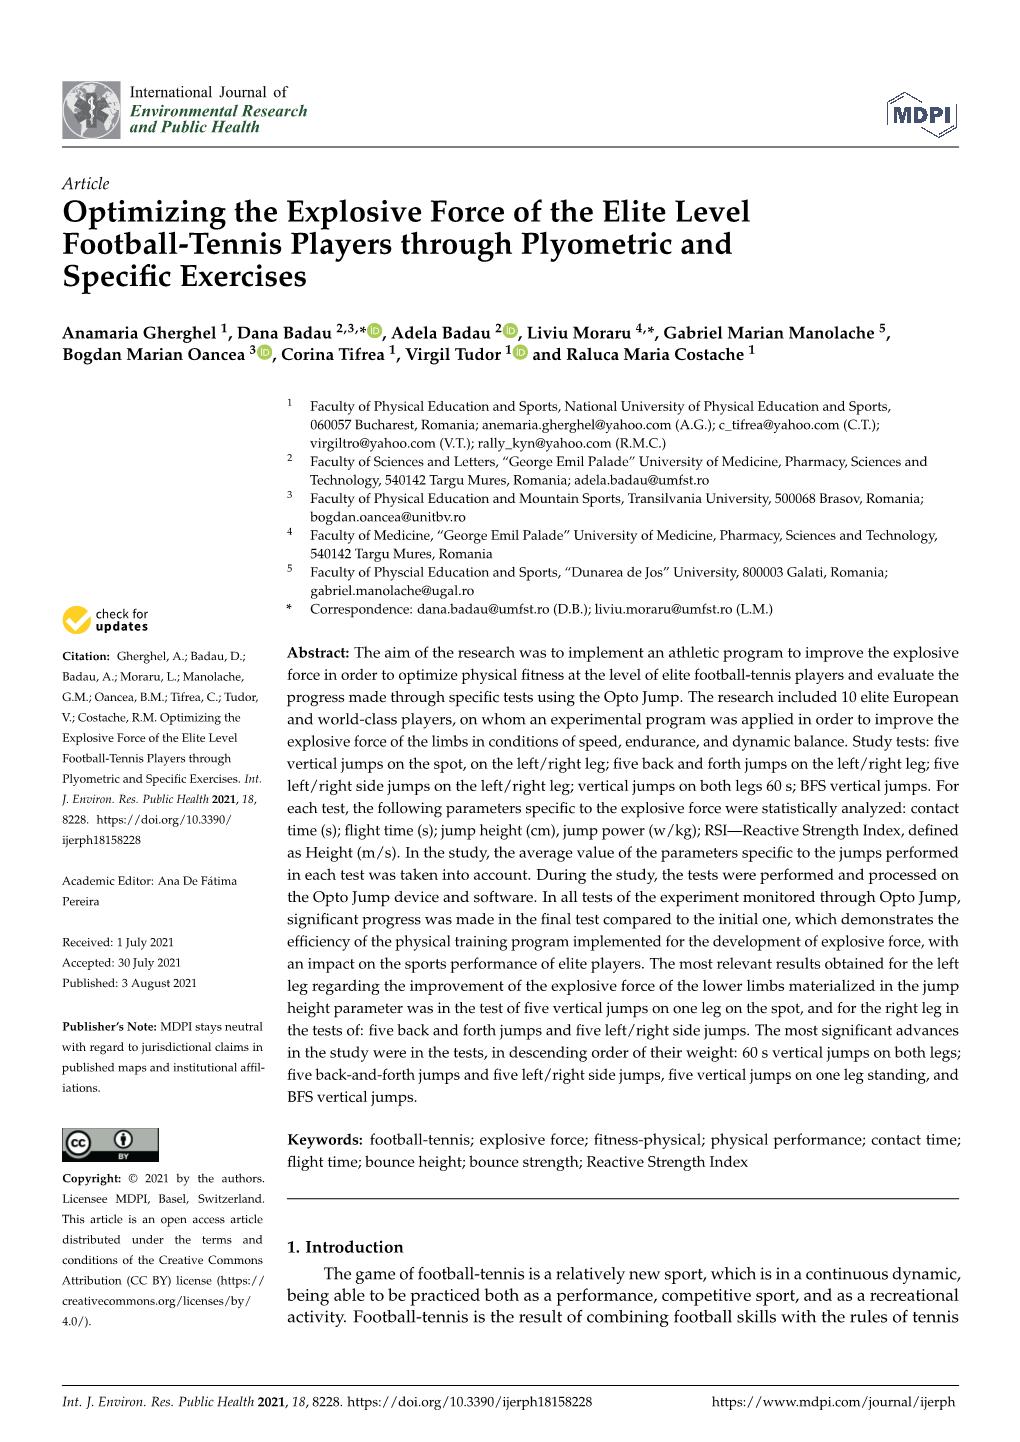 Optimizing the Explosive Force of the Elite Level Football-Tennis Players Through Plyometric and Specific Exercises